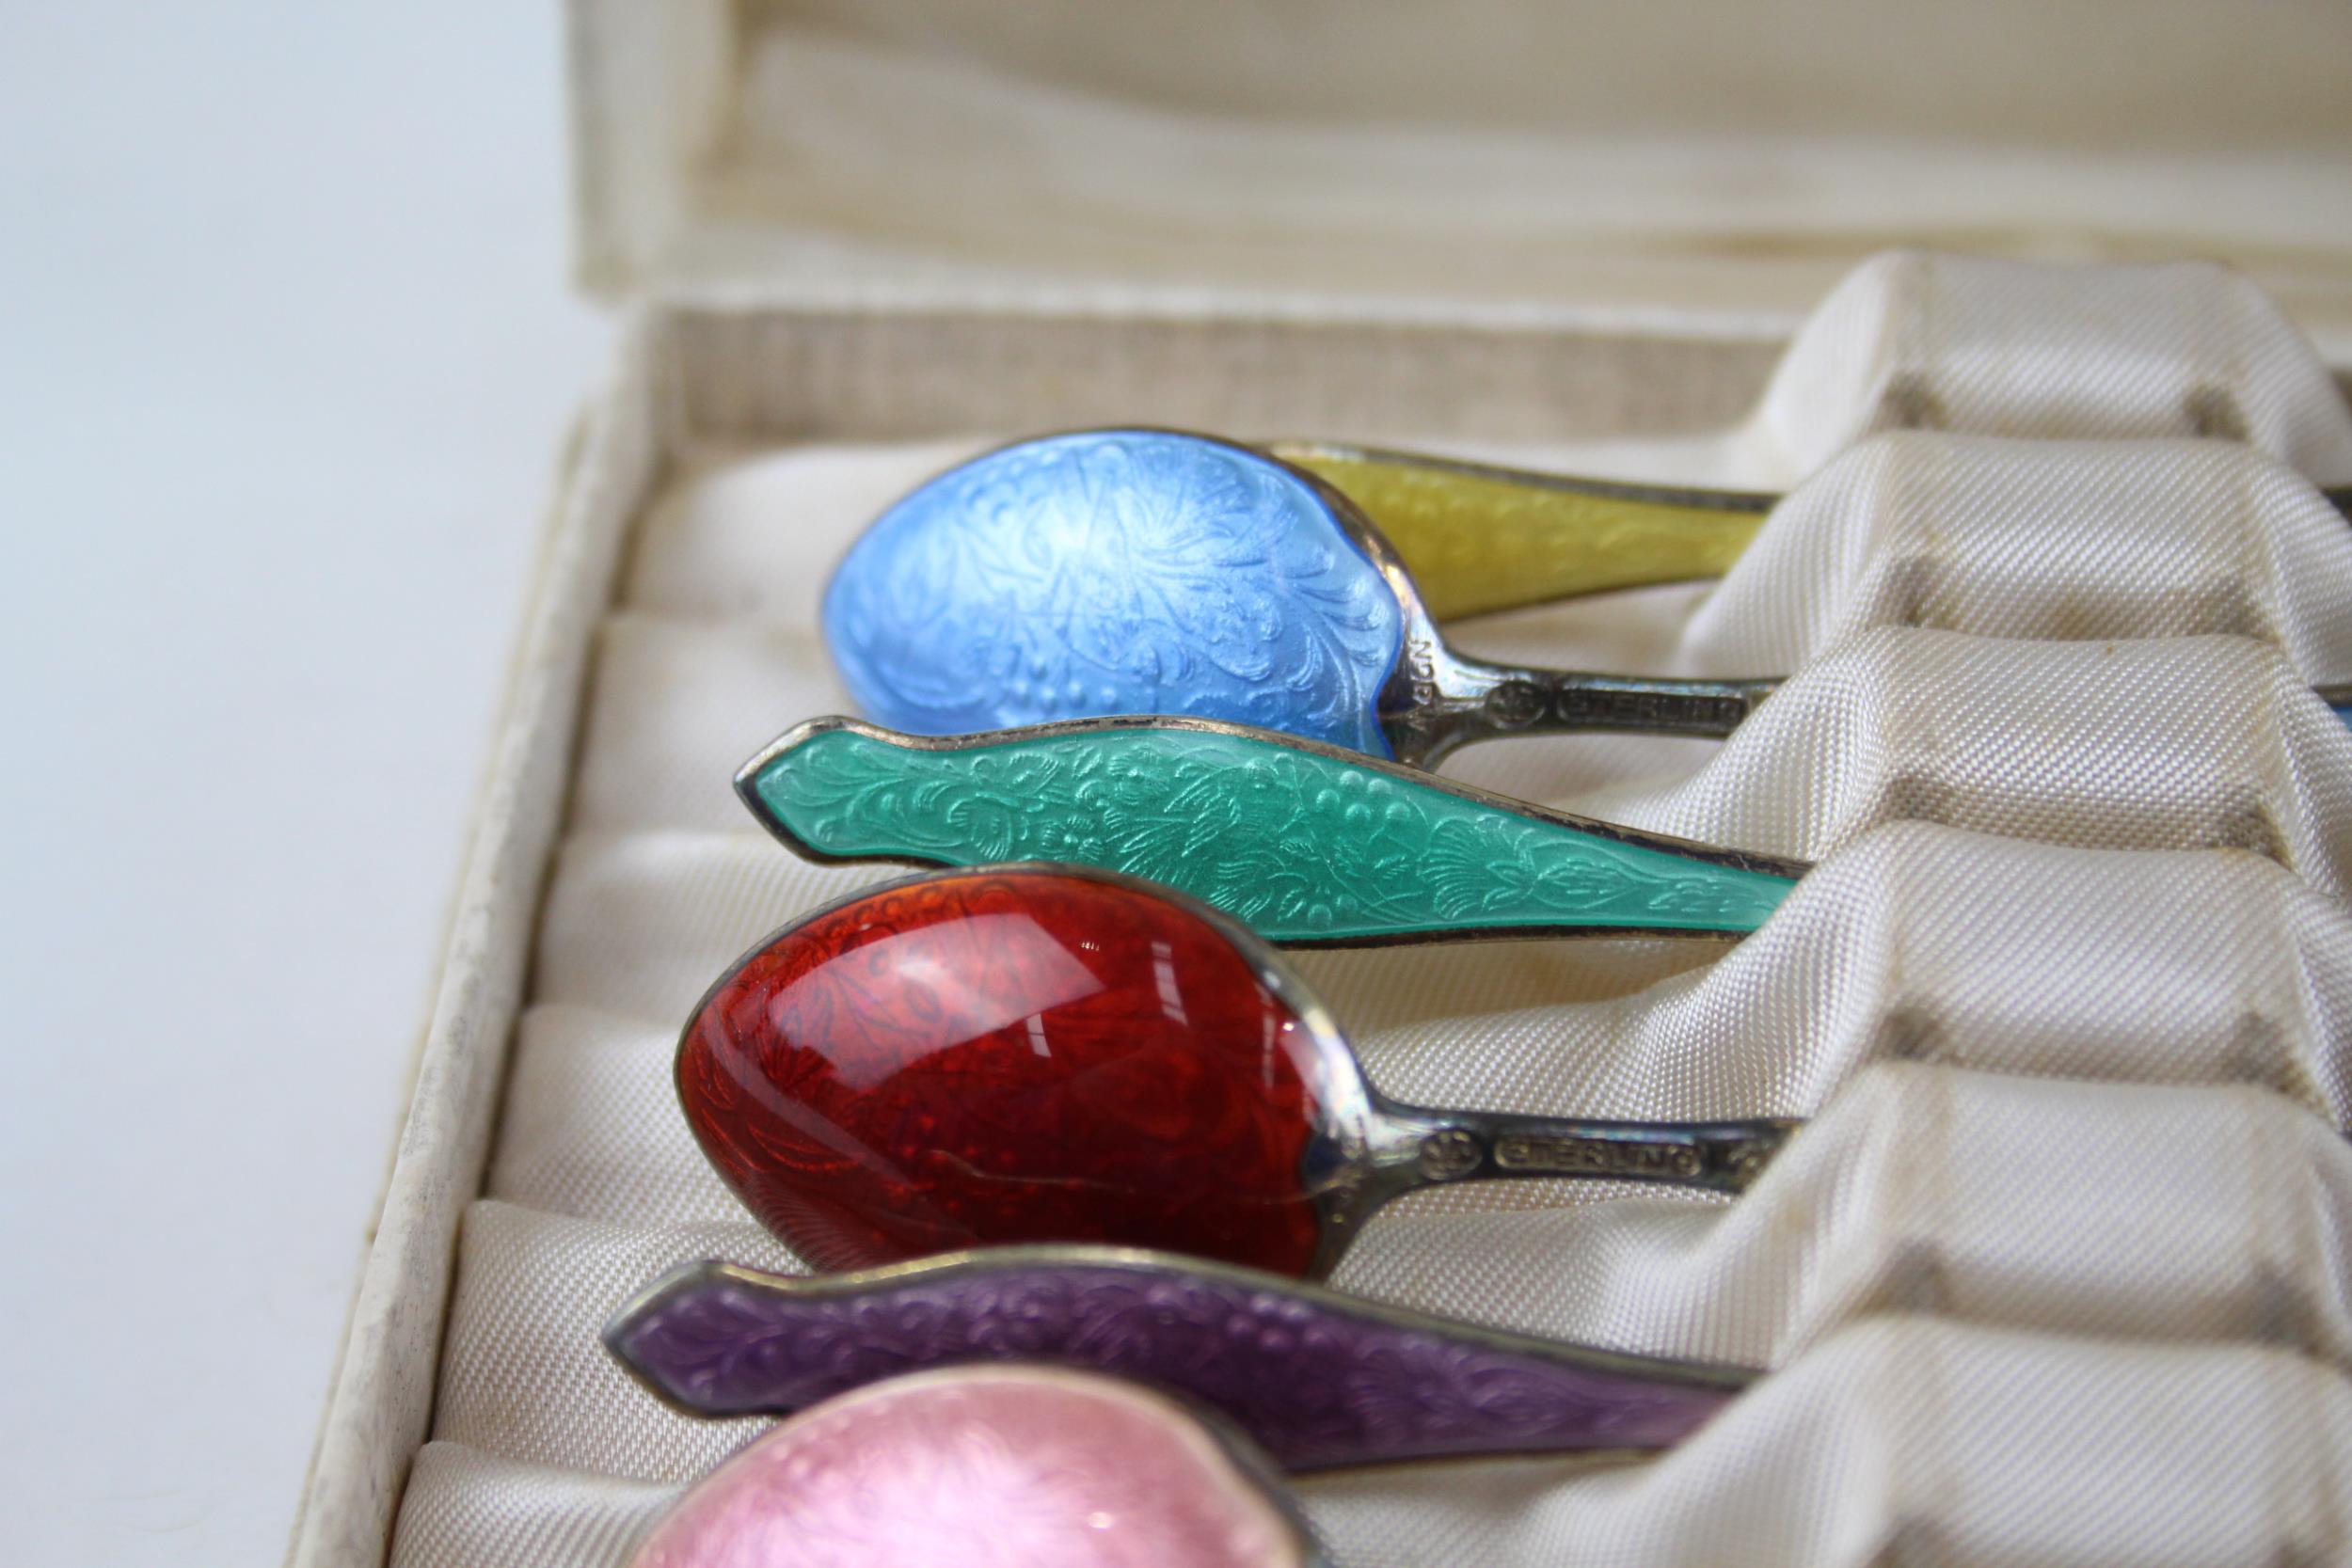 7 x Vintage Stamped .925 Sterling Silver Guilloche Enamel Teaspoons Boxed (81g) - Length - 10cm In - Image 4 of 7